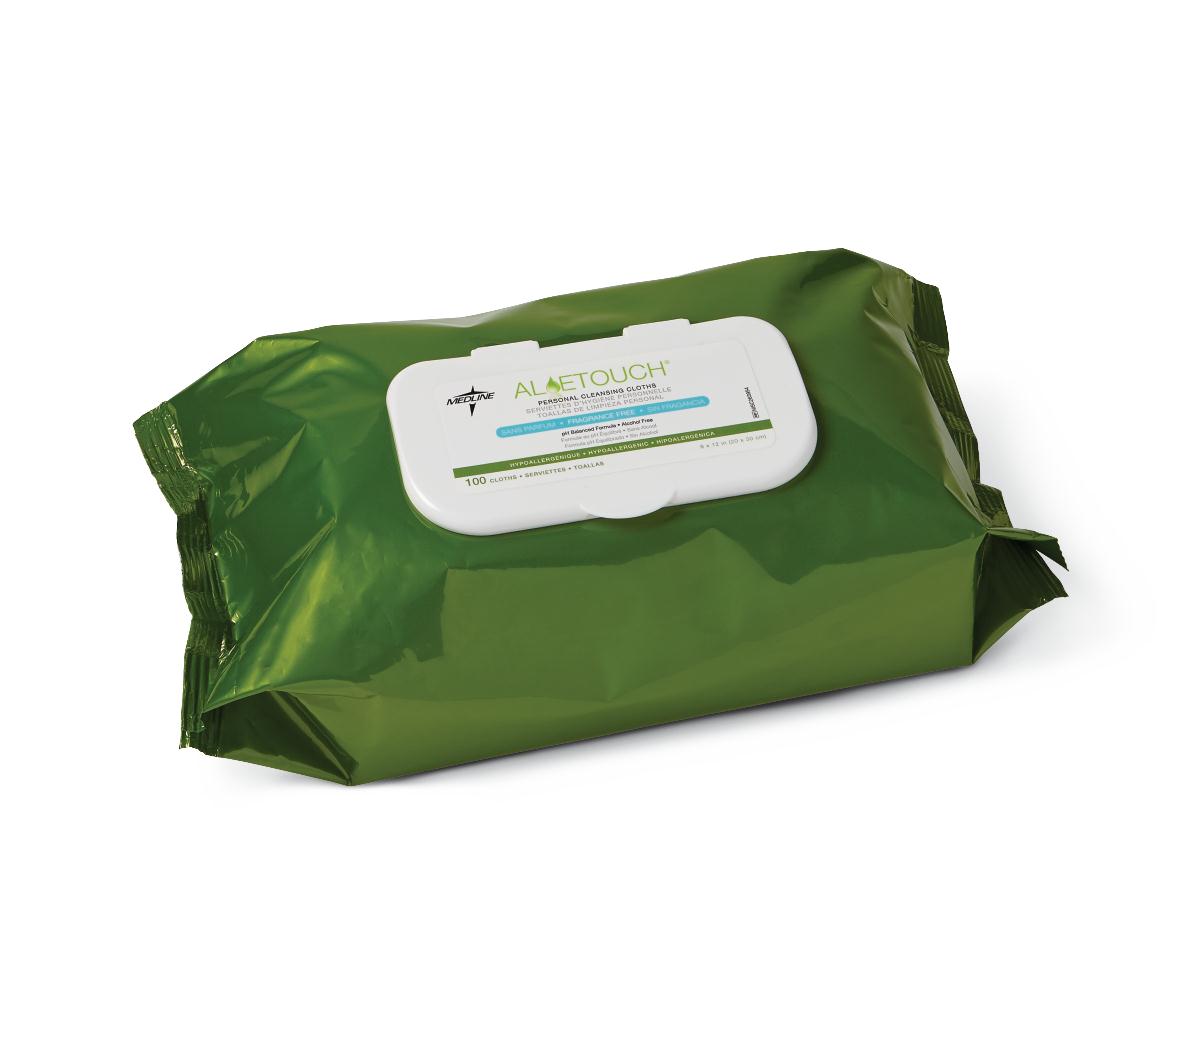 Aloetouch Personal Cleansing Wipes Fragrance Free